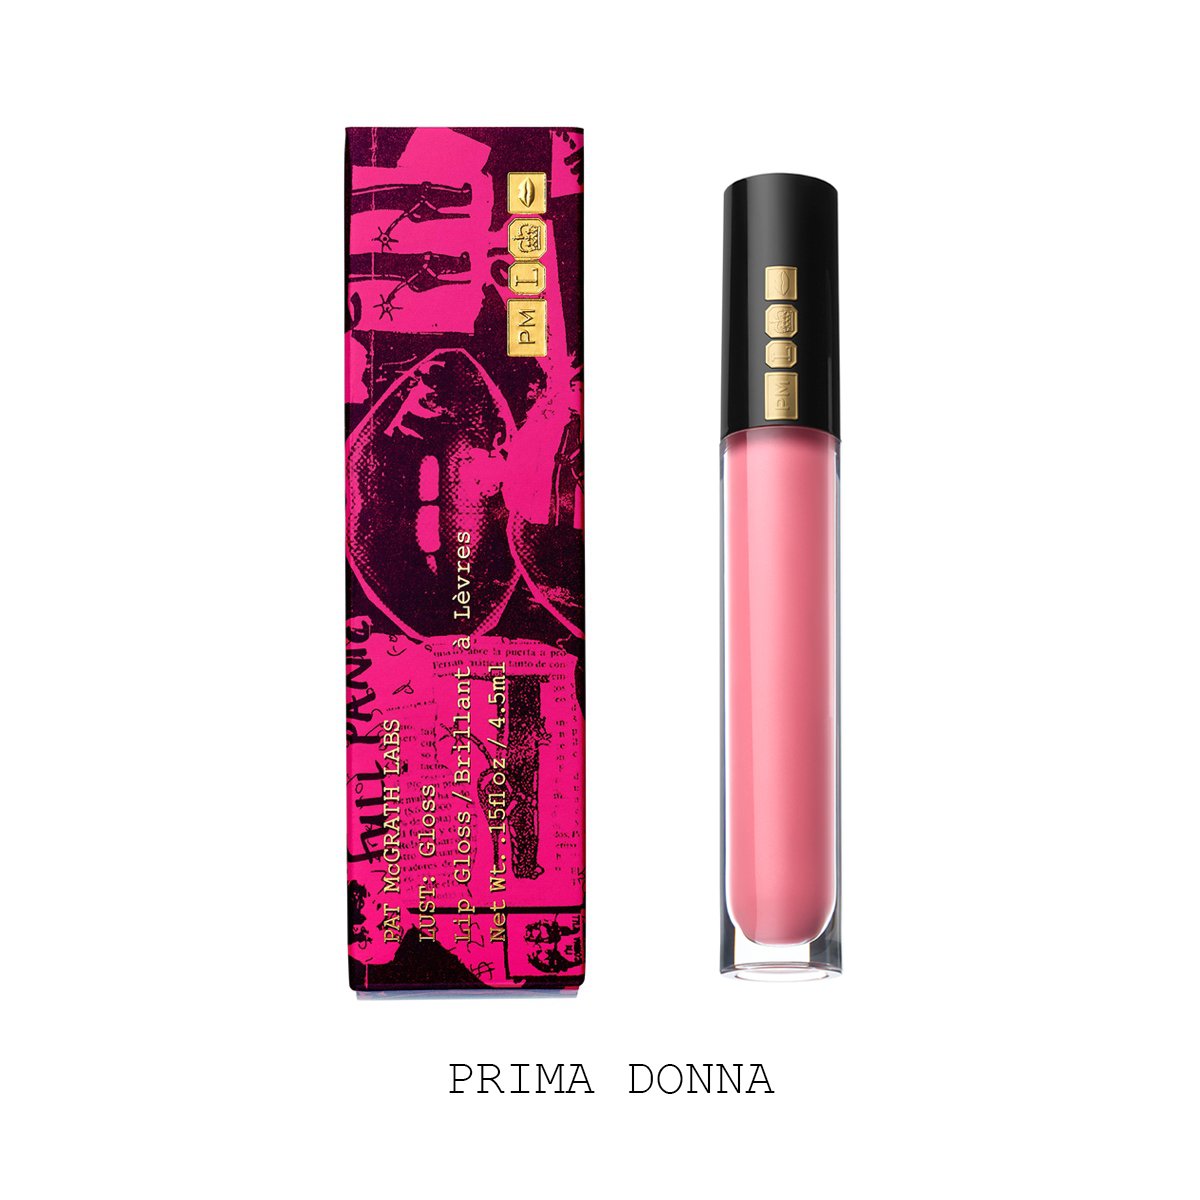 Load image into Gallery viewer, Pat McGrath Lust: Gloss Lip Gloss - Prima Donna (Mid Tone Cool Pink)
